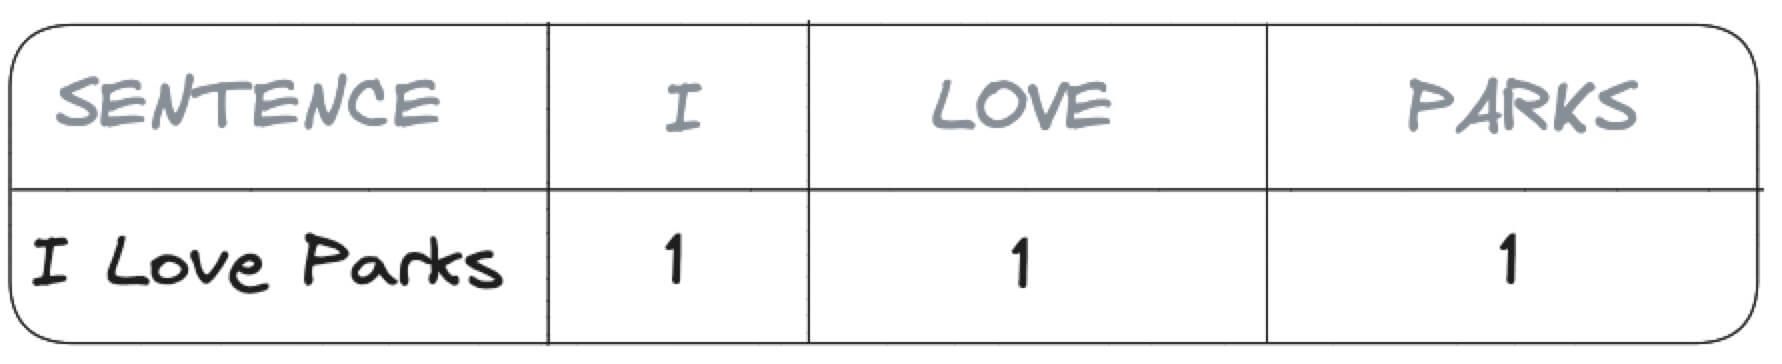 Table containing three columns named I, LOVE and PARKS with value 1